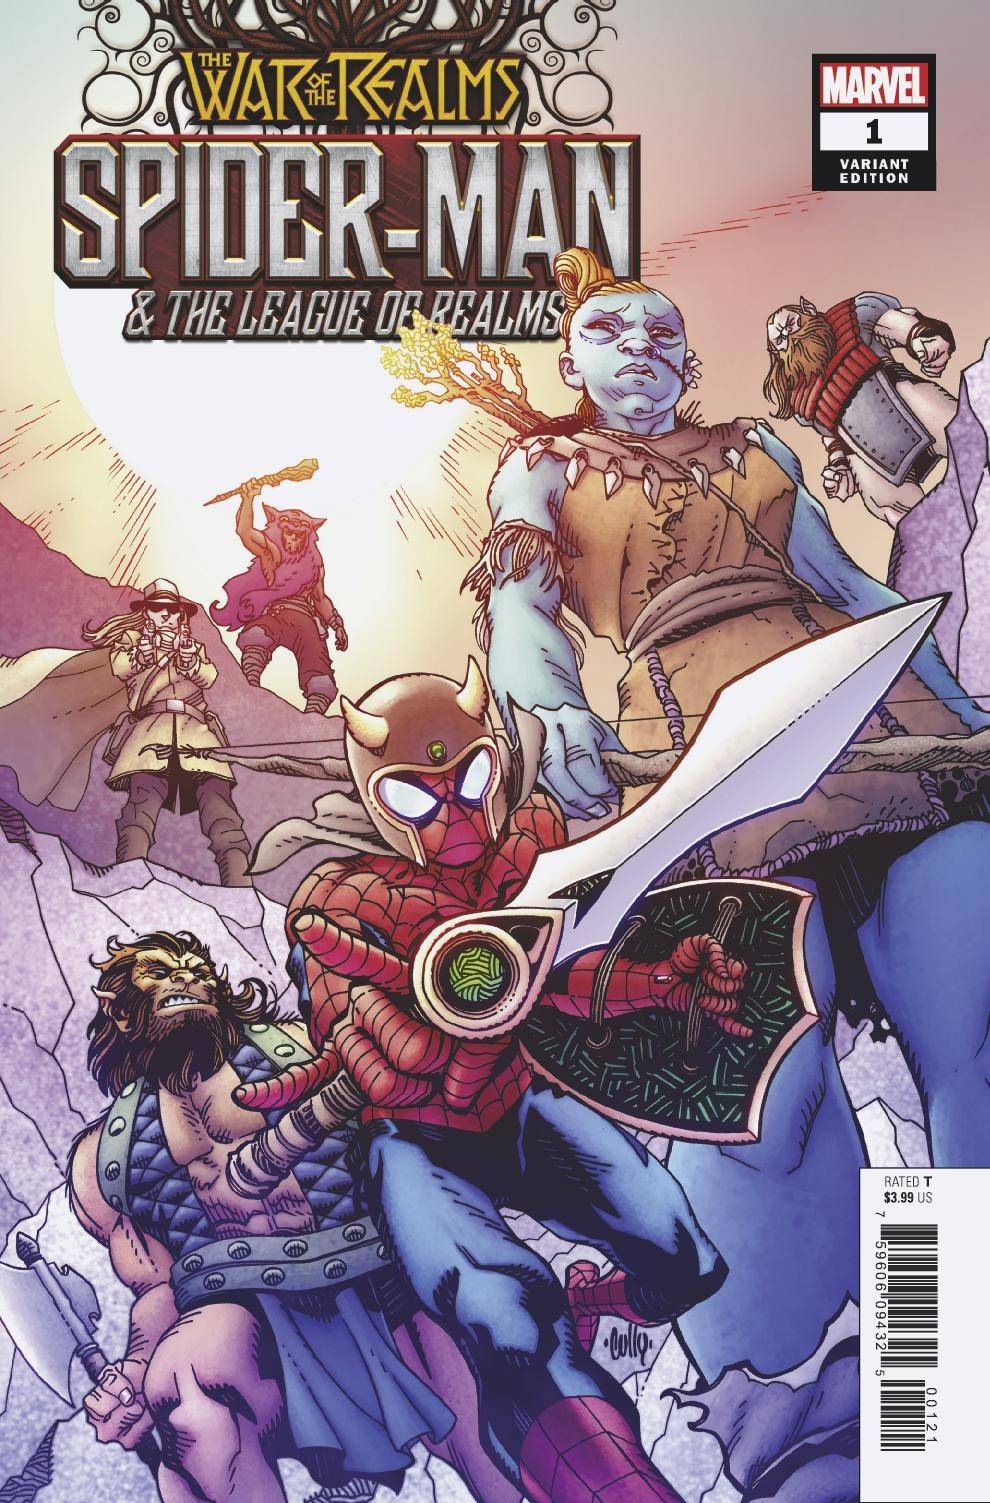 War of Realms Spider-Man & League of Realms #1 Hamner Variant (Of 3)